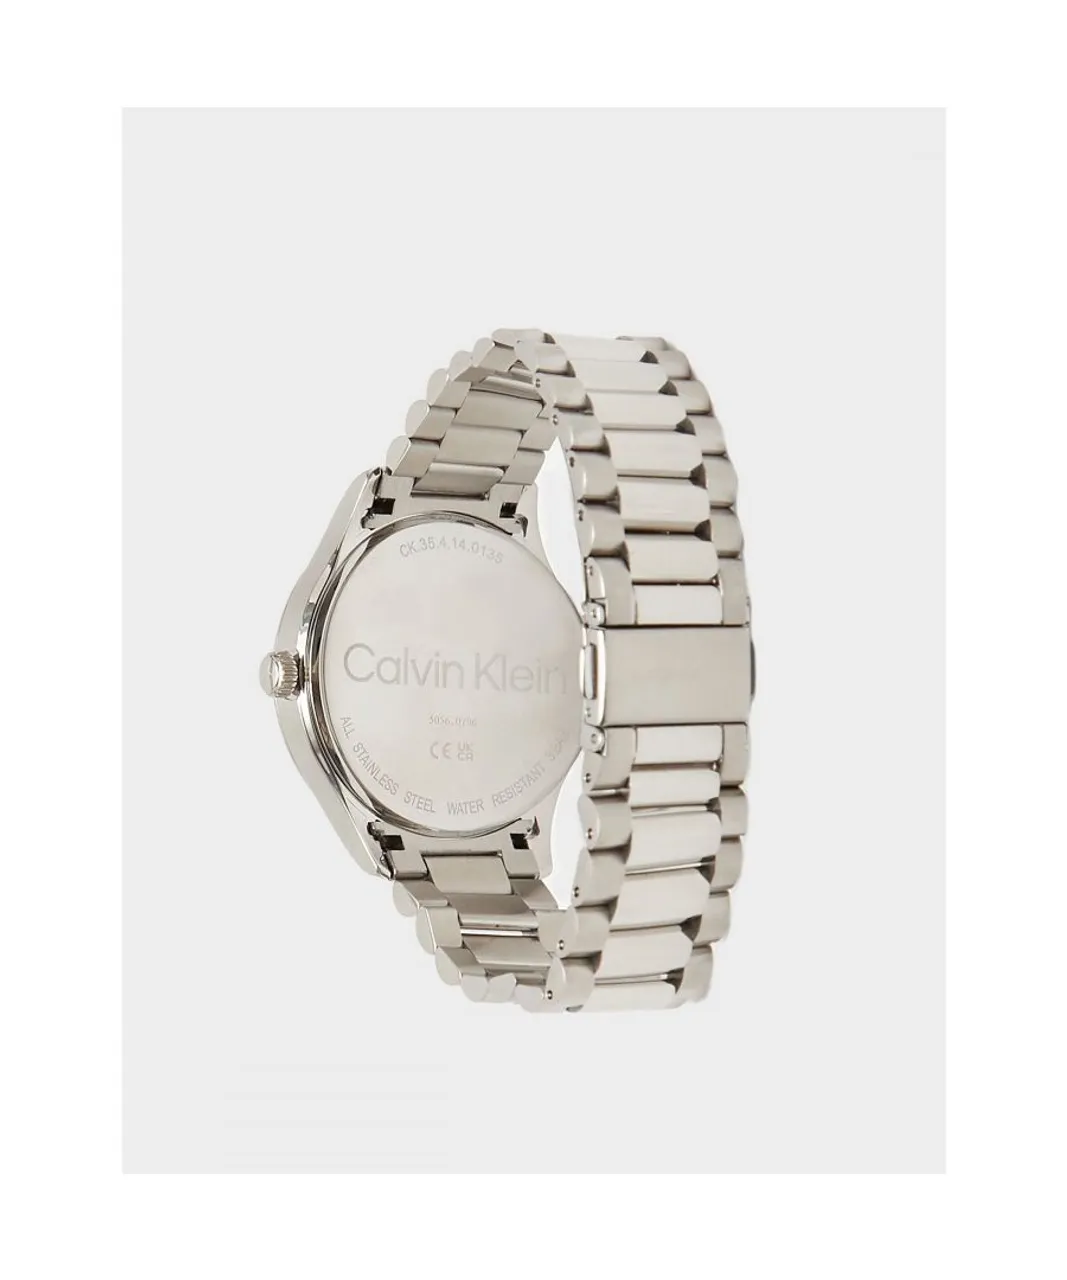 Calvin Klein Mens Accessories Iconic Bracelet Watch in Silver black Stainless Steel - One Size